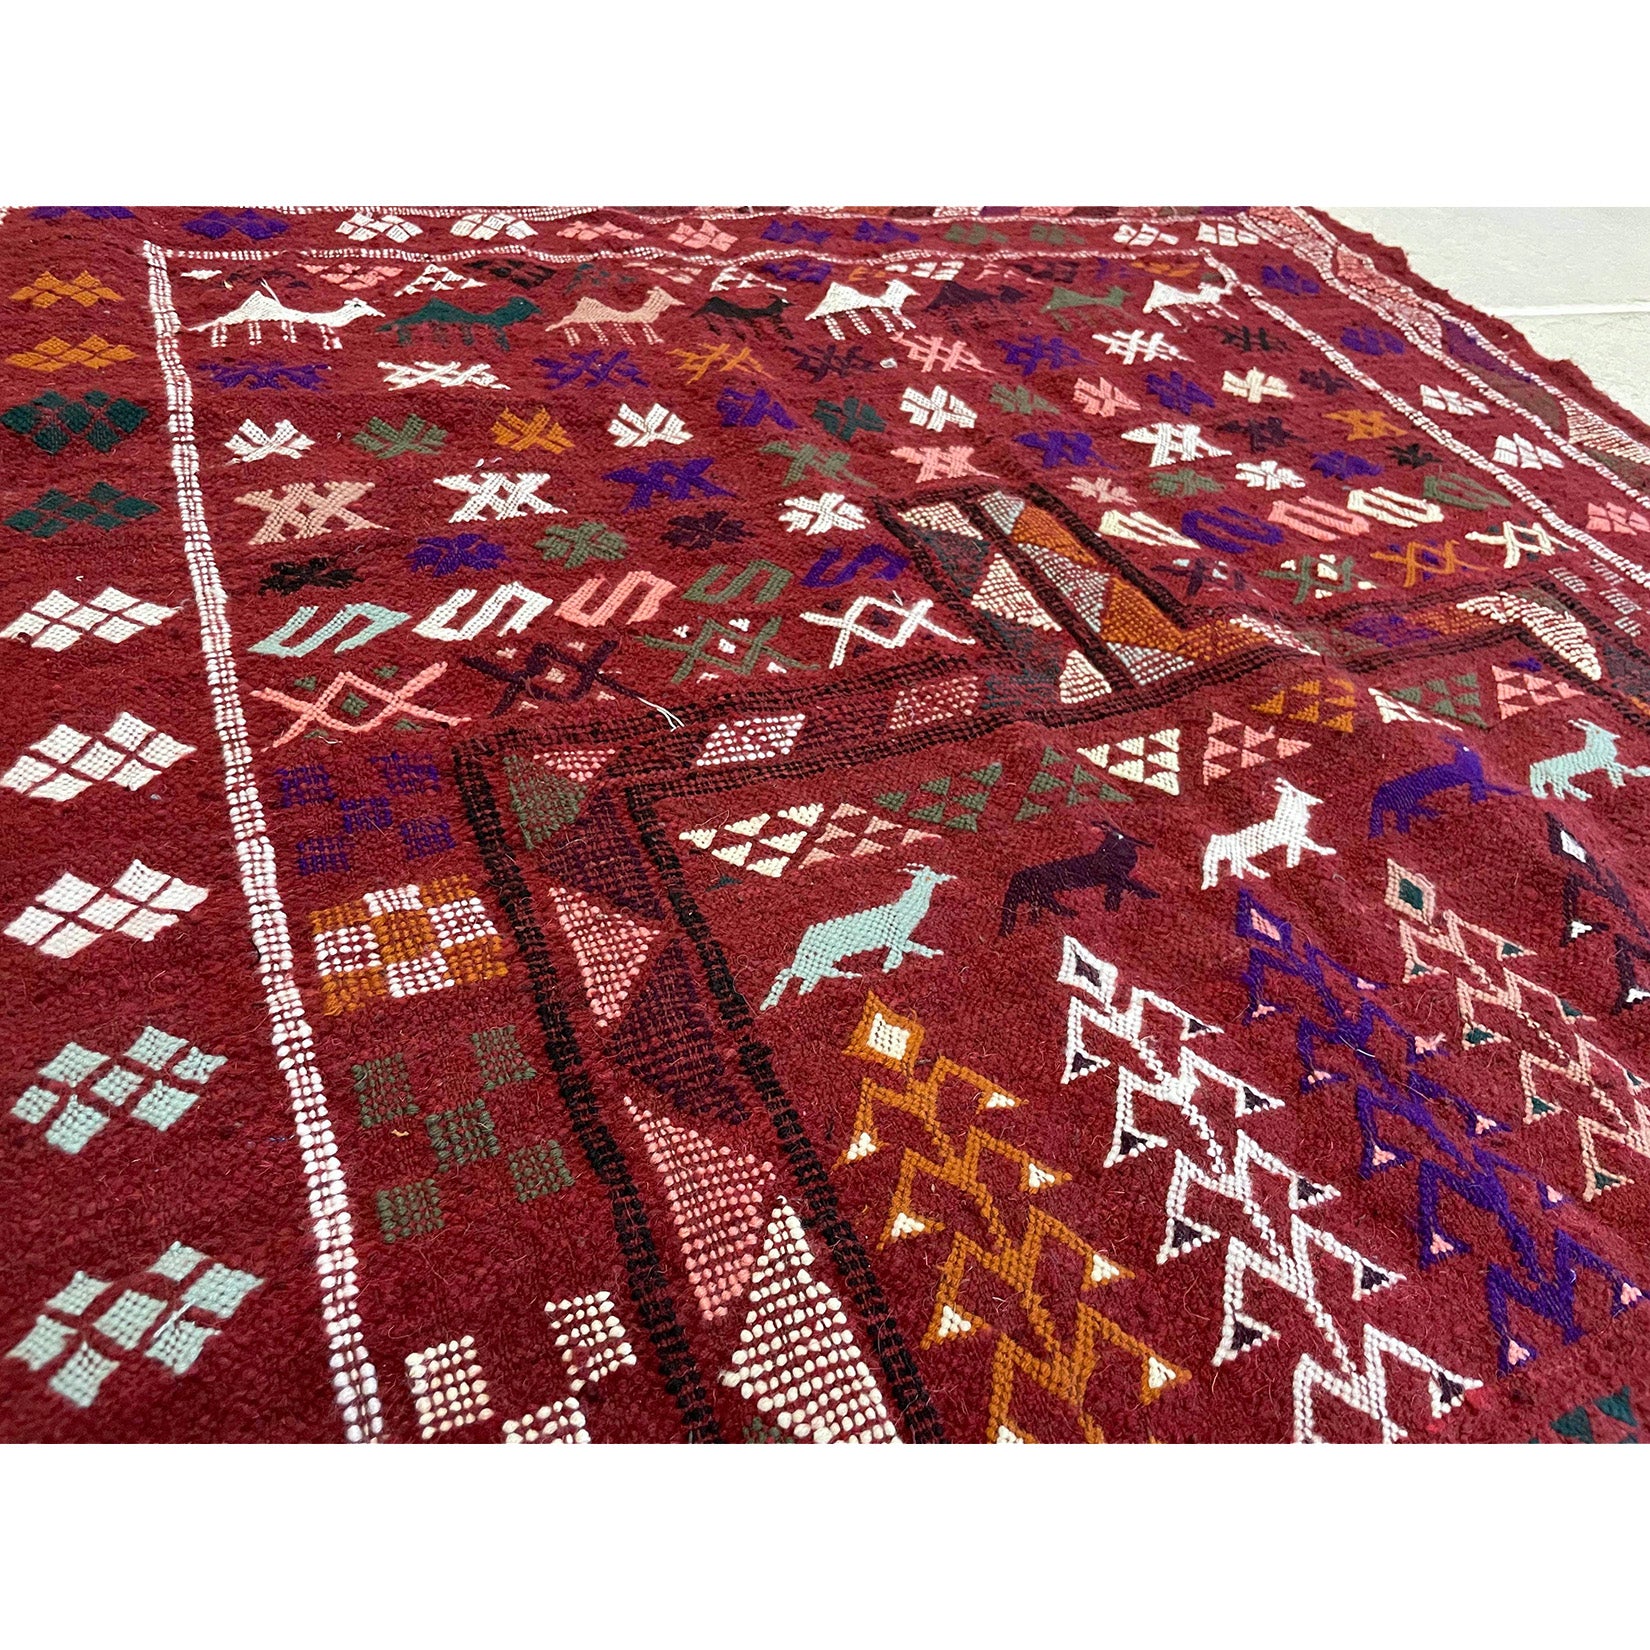 Boujad tribal Moroccan Berber rug with animal and plant motifs  | Kantara Moroccan Rugs in Los Angeles